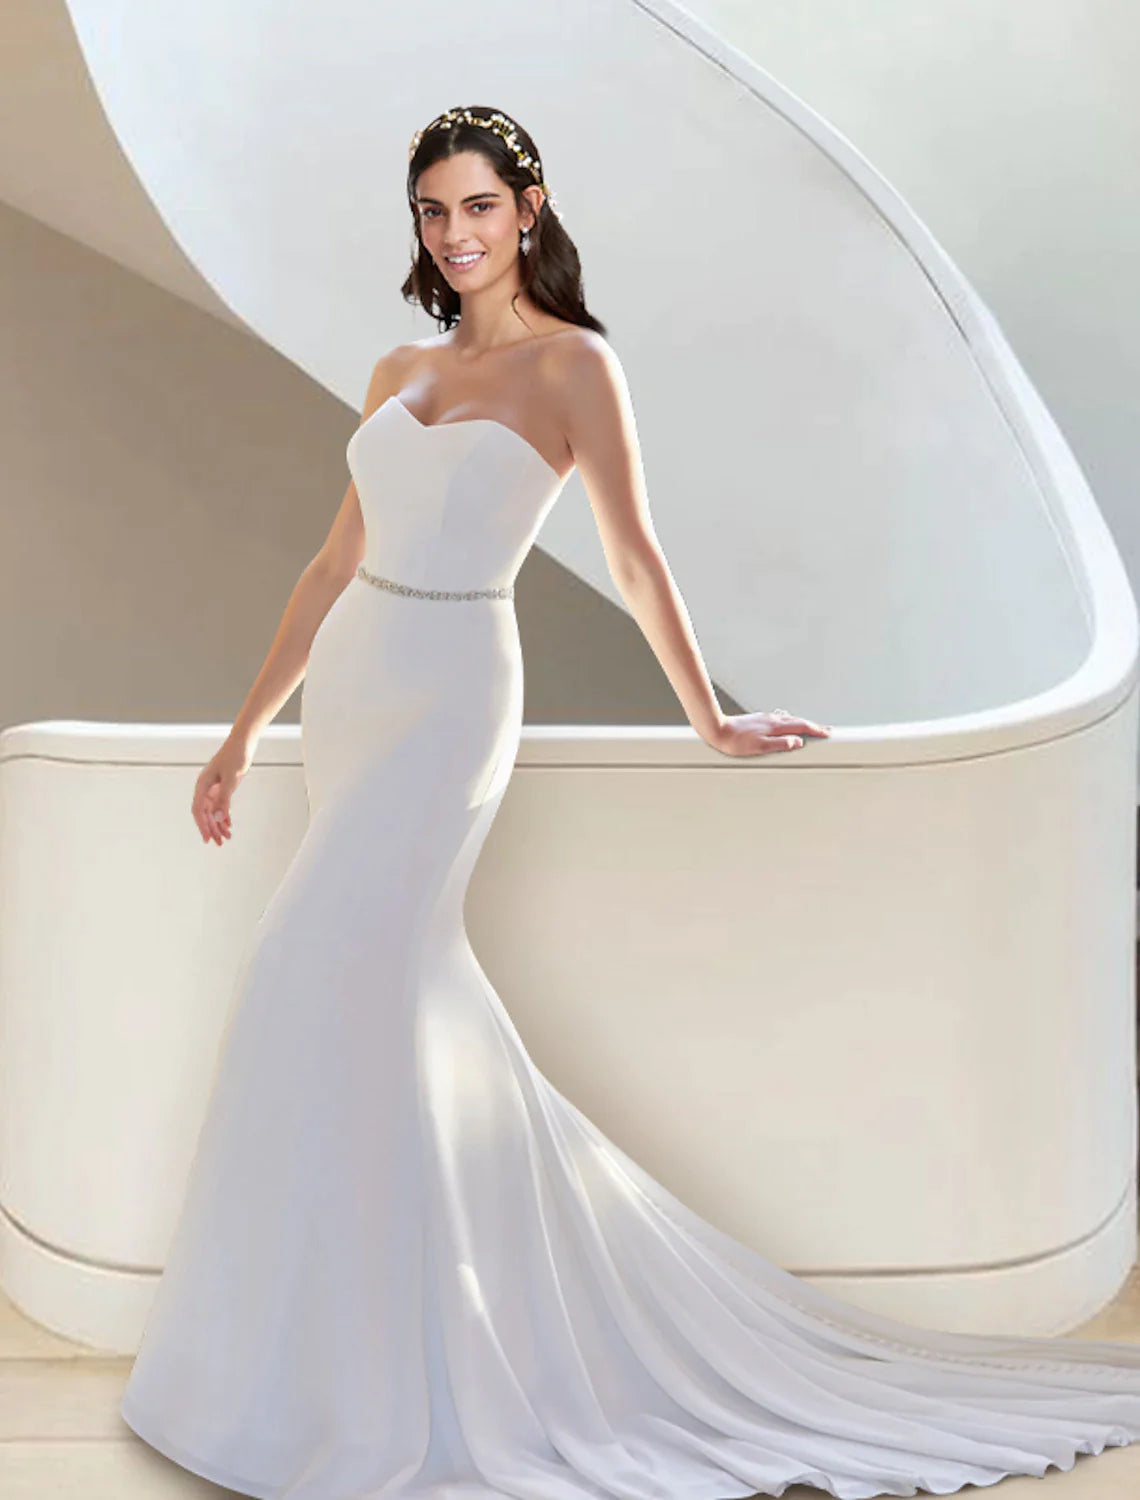 Formal Fall Wedding Dresses Two Piece Sweetheart Strapless Court Train Stretch Fabric Bridal Gowns With Sashes / Ribbons